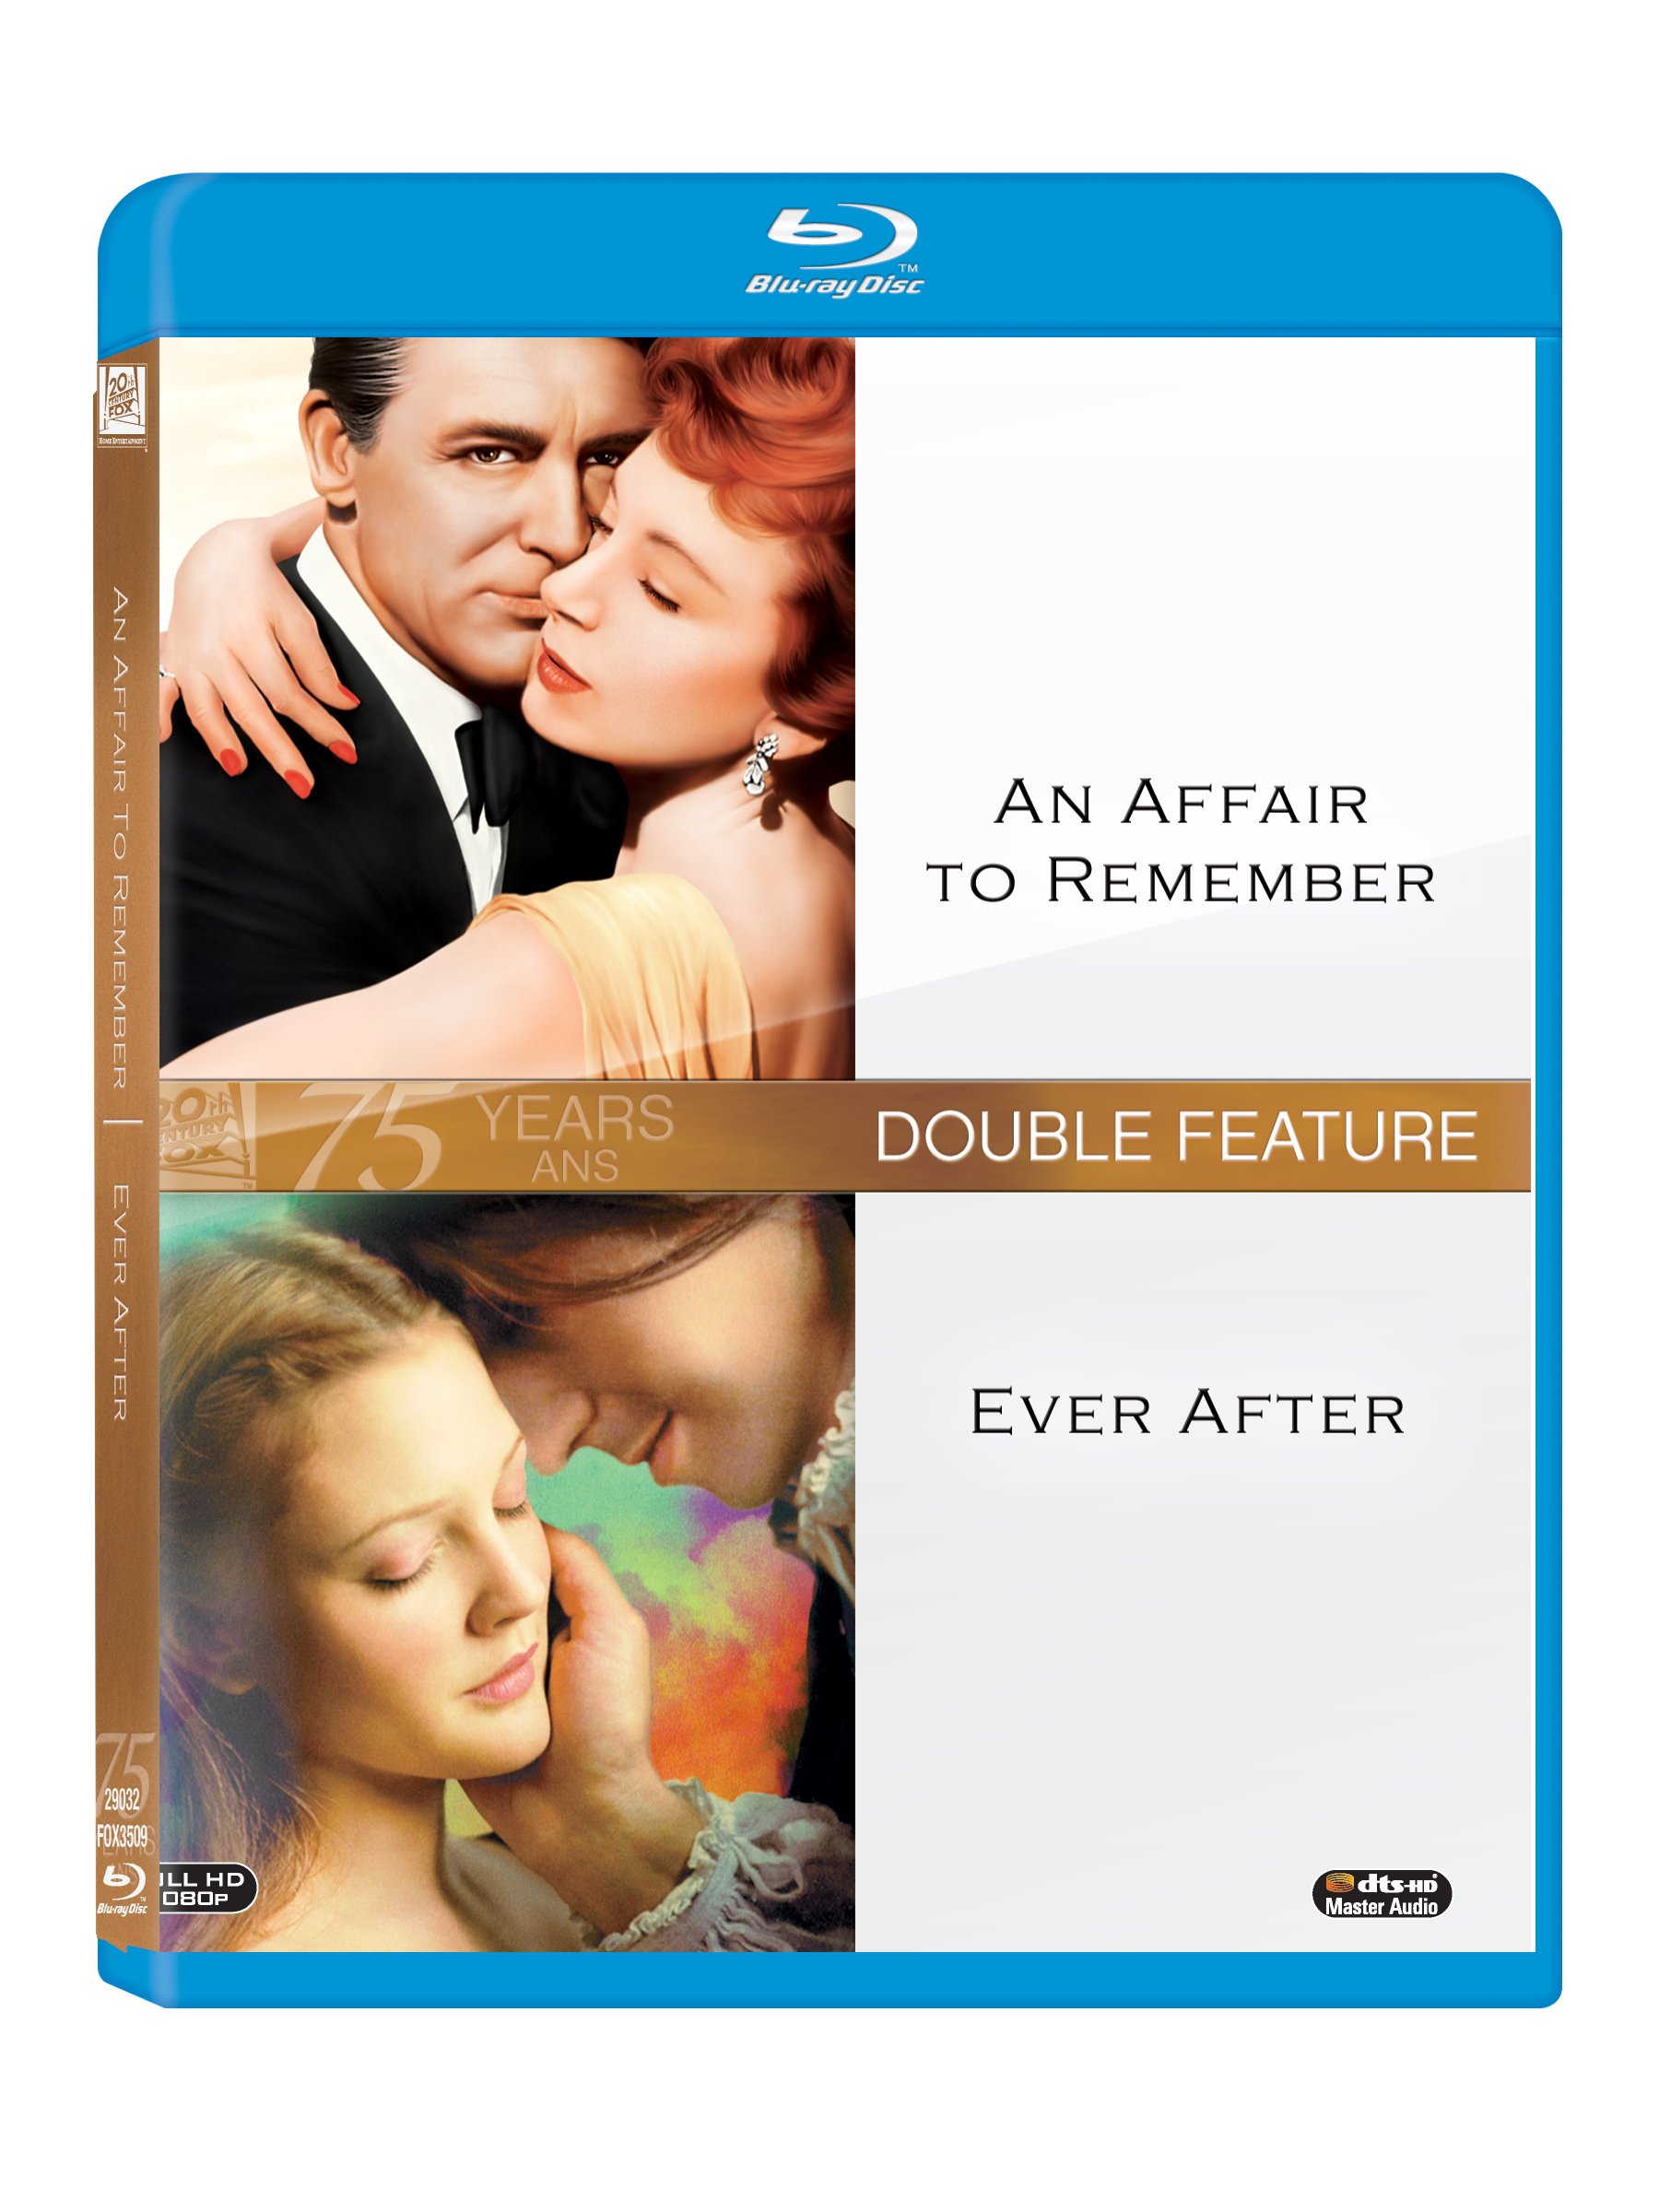 2-movies-collection-an-affair-to-remember-even-after-2-disc-box-set